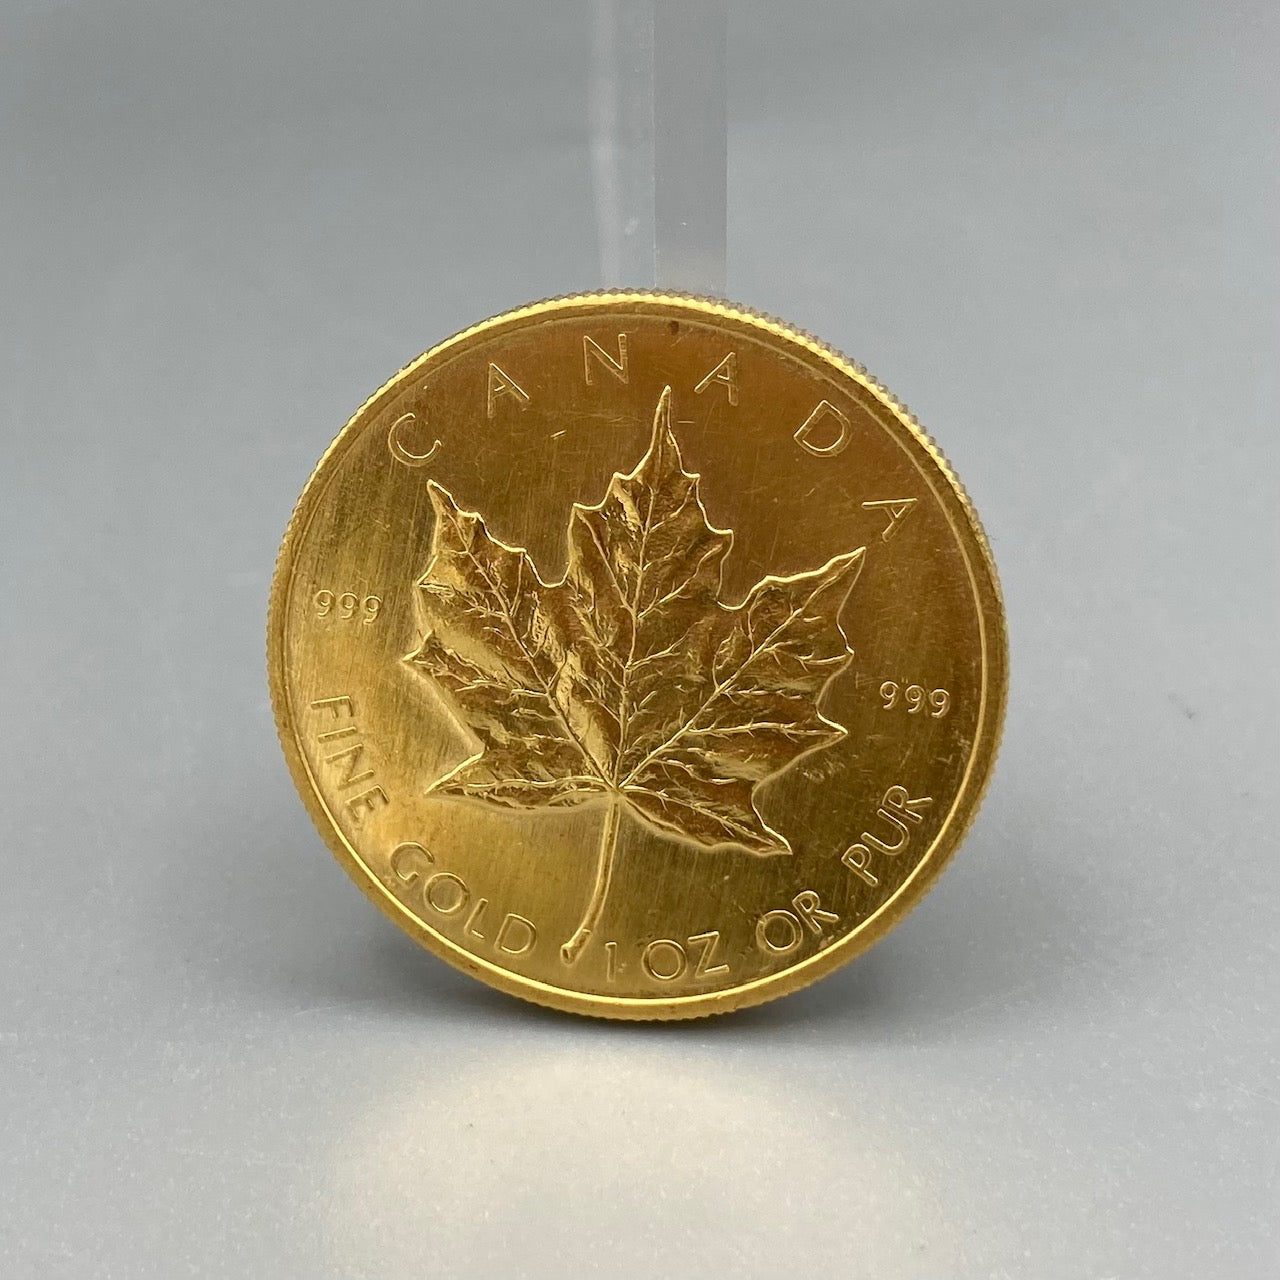 Canada 1 oz Gold Maple Leaf .999 (ASK FOR PRICE)